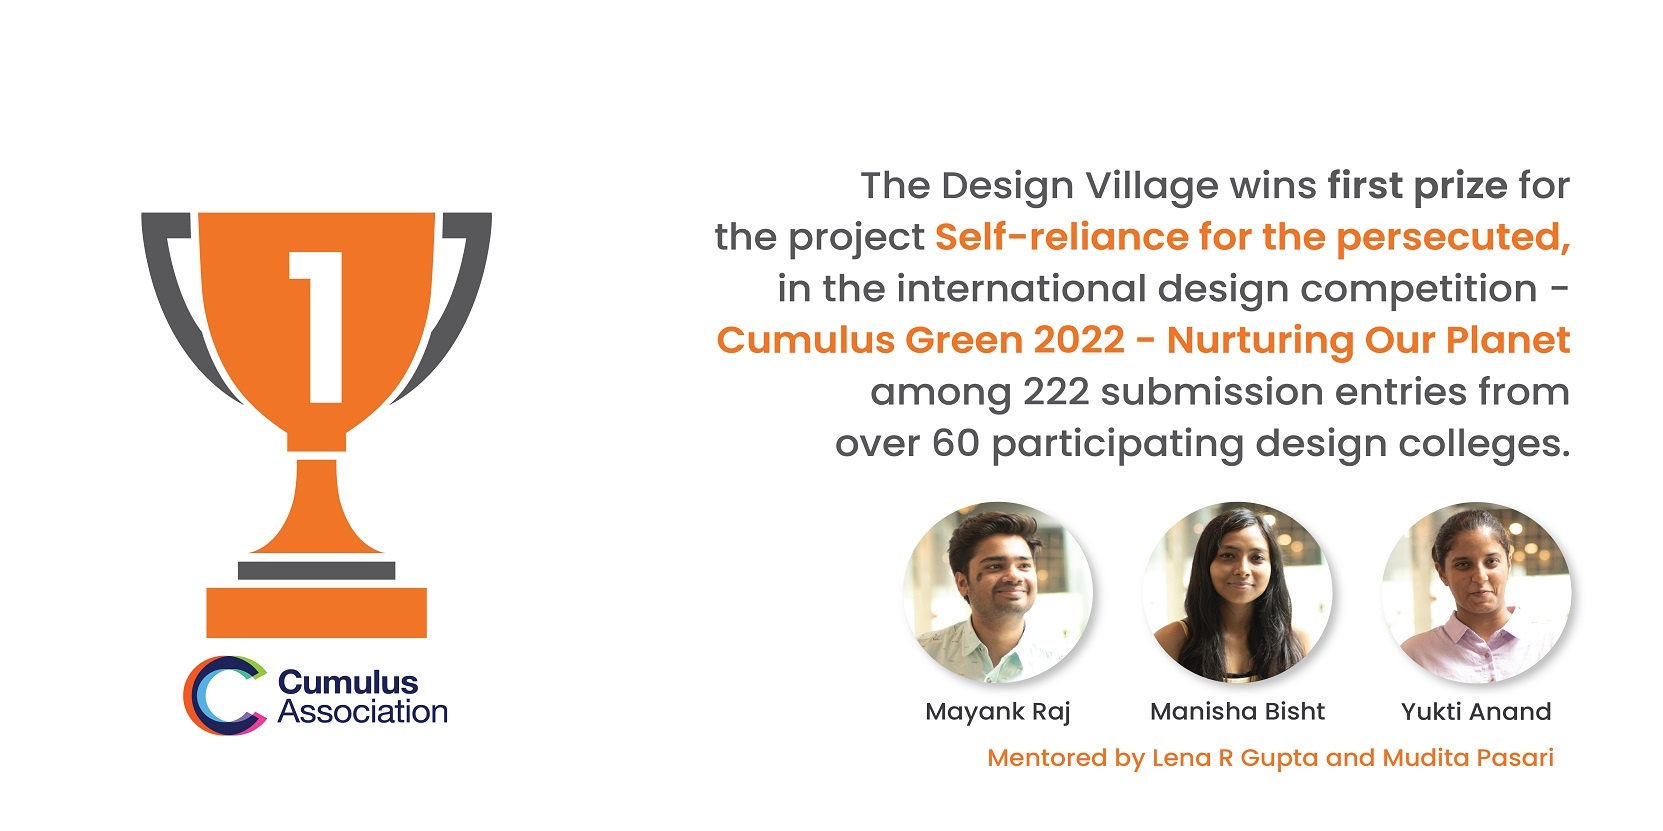 The Design Village wins first prize at Cumulus Green 2022